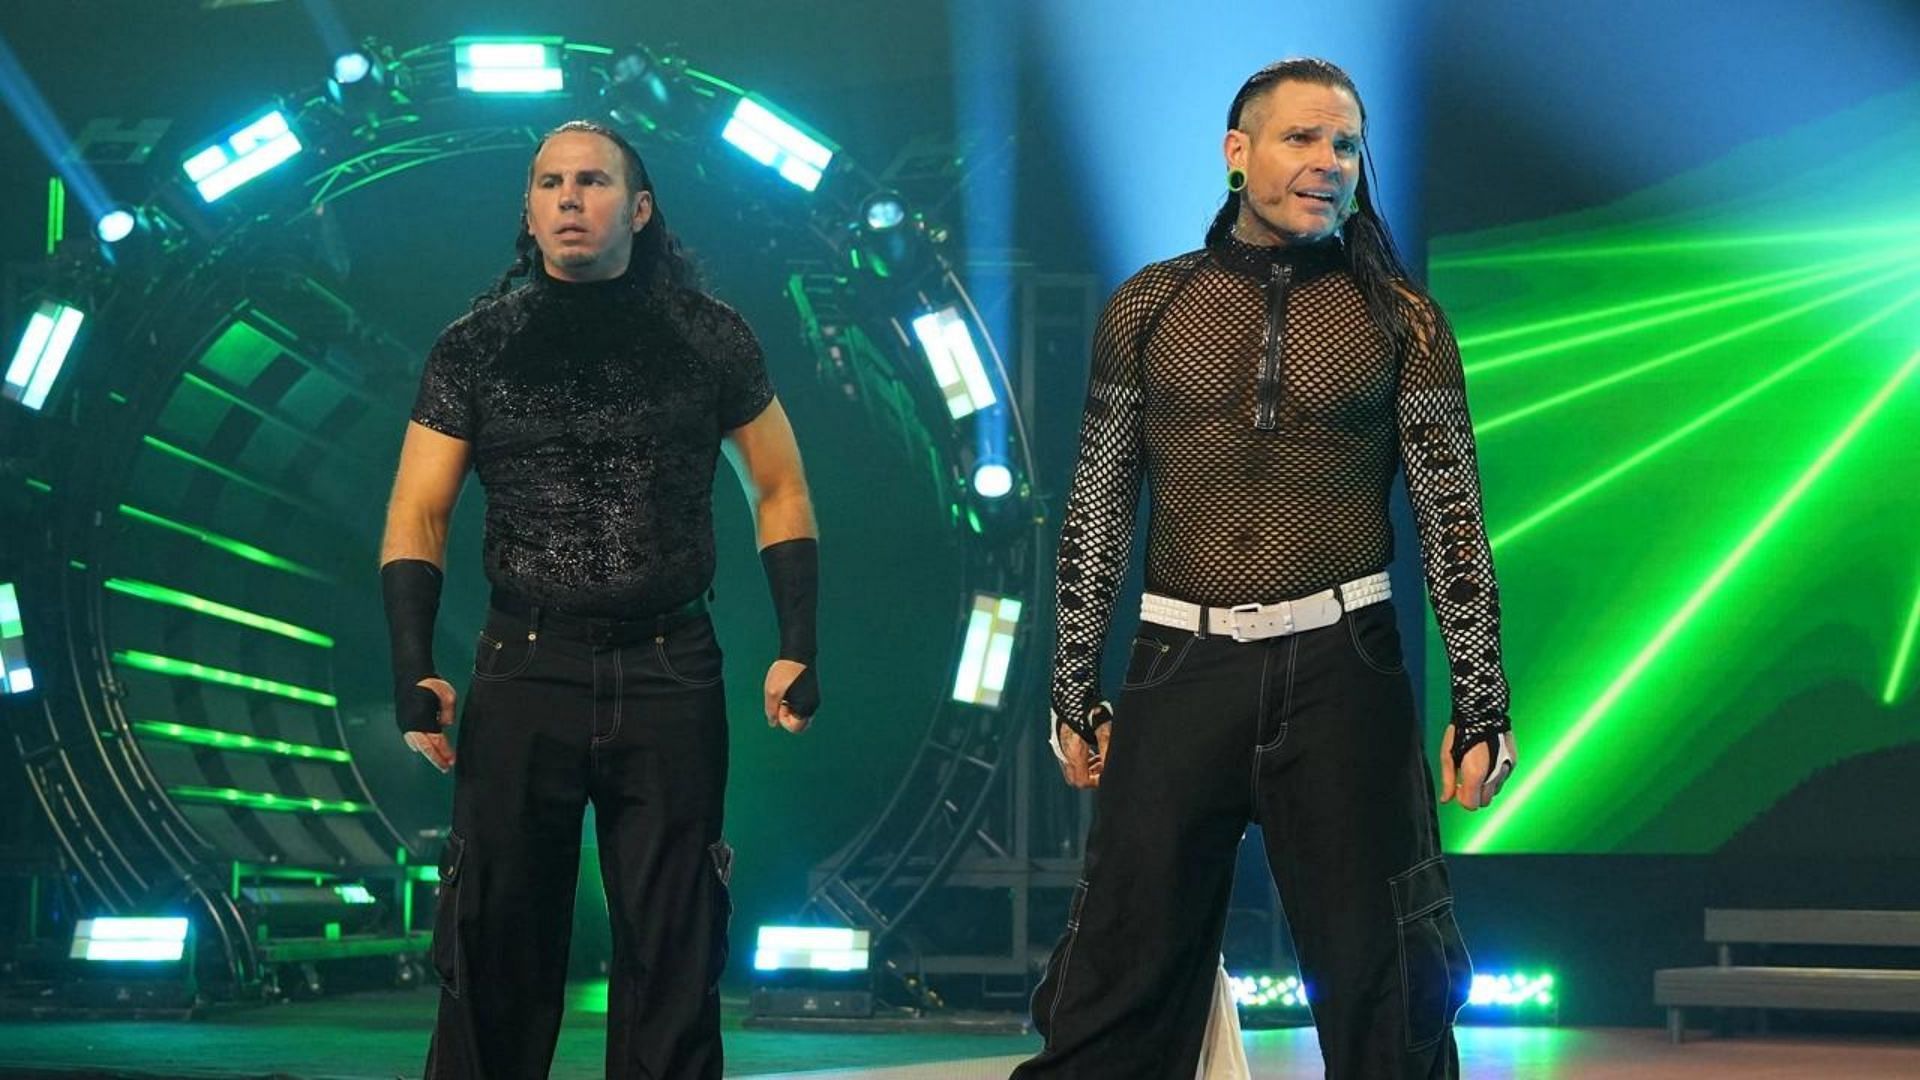 The Hardy Boyz are one of the most iconic tag teams in the industry